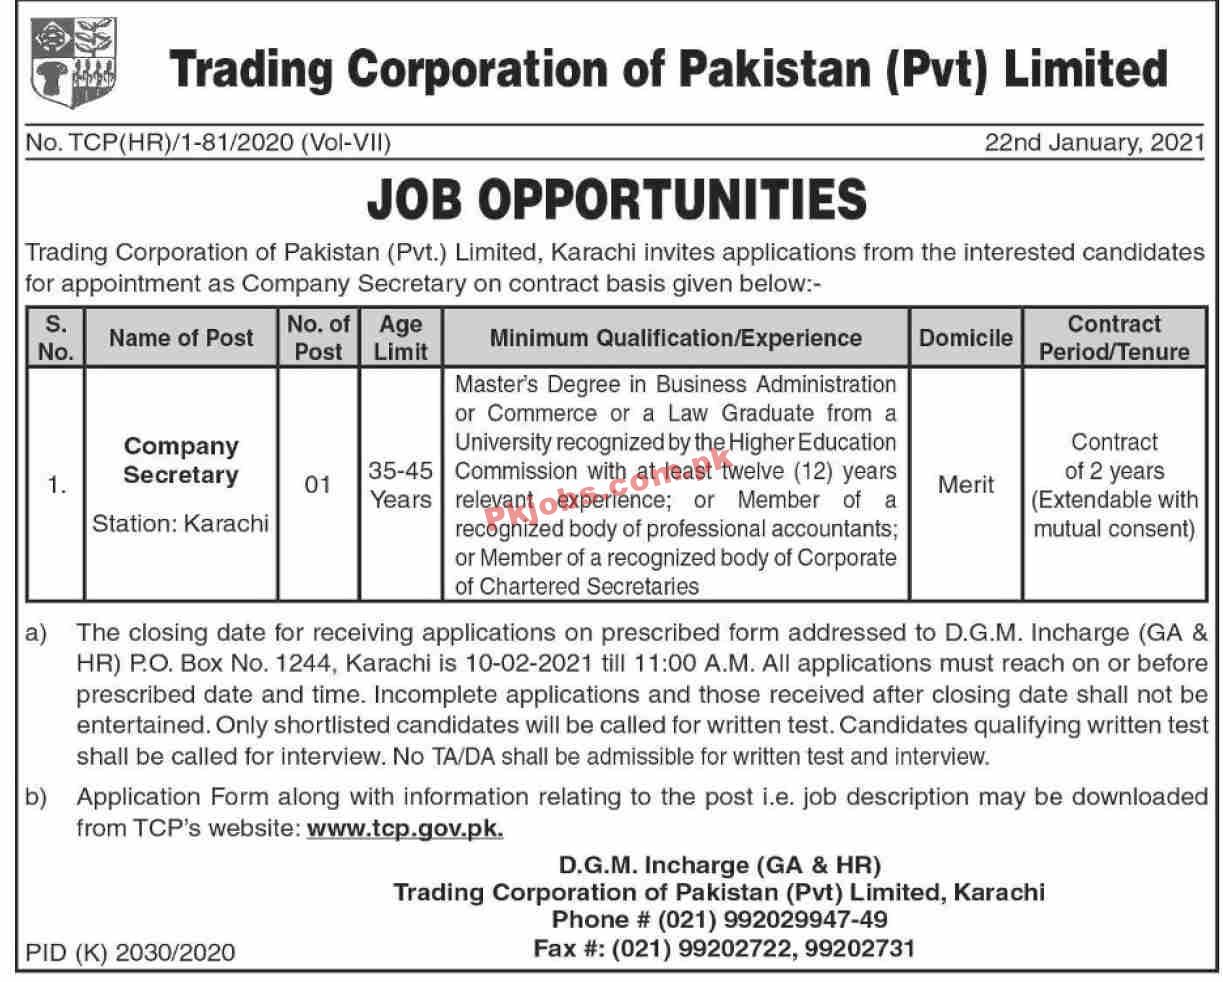 Jobs in Trading Corporation of Pakistan (Pvt) Limited